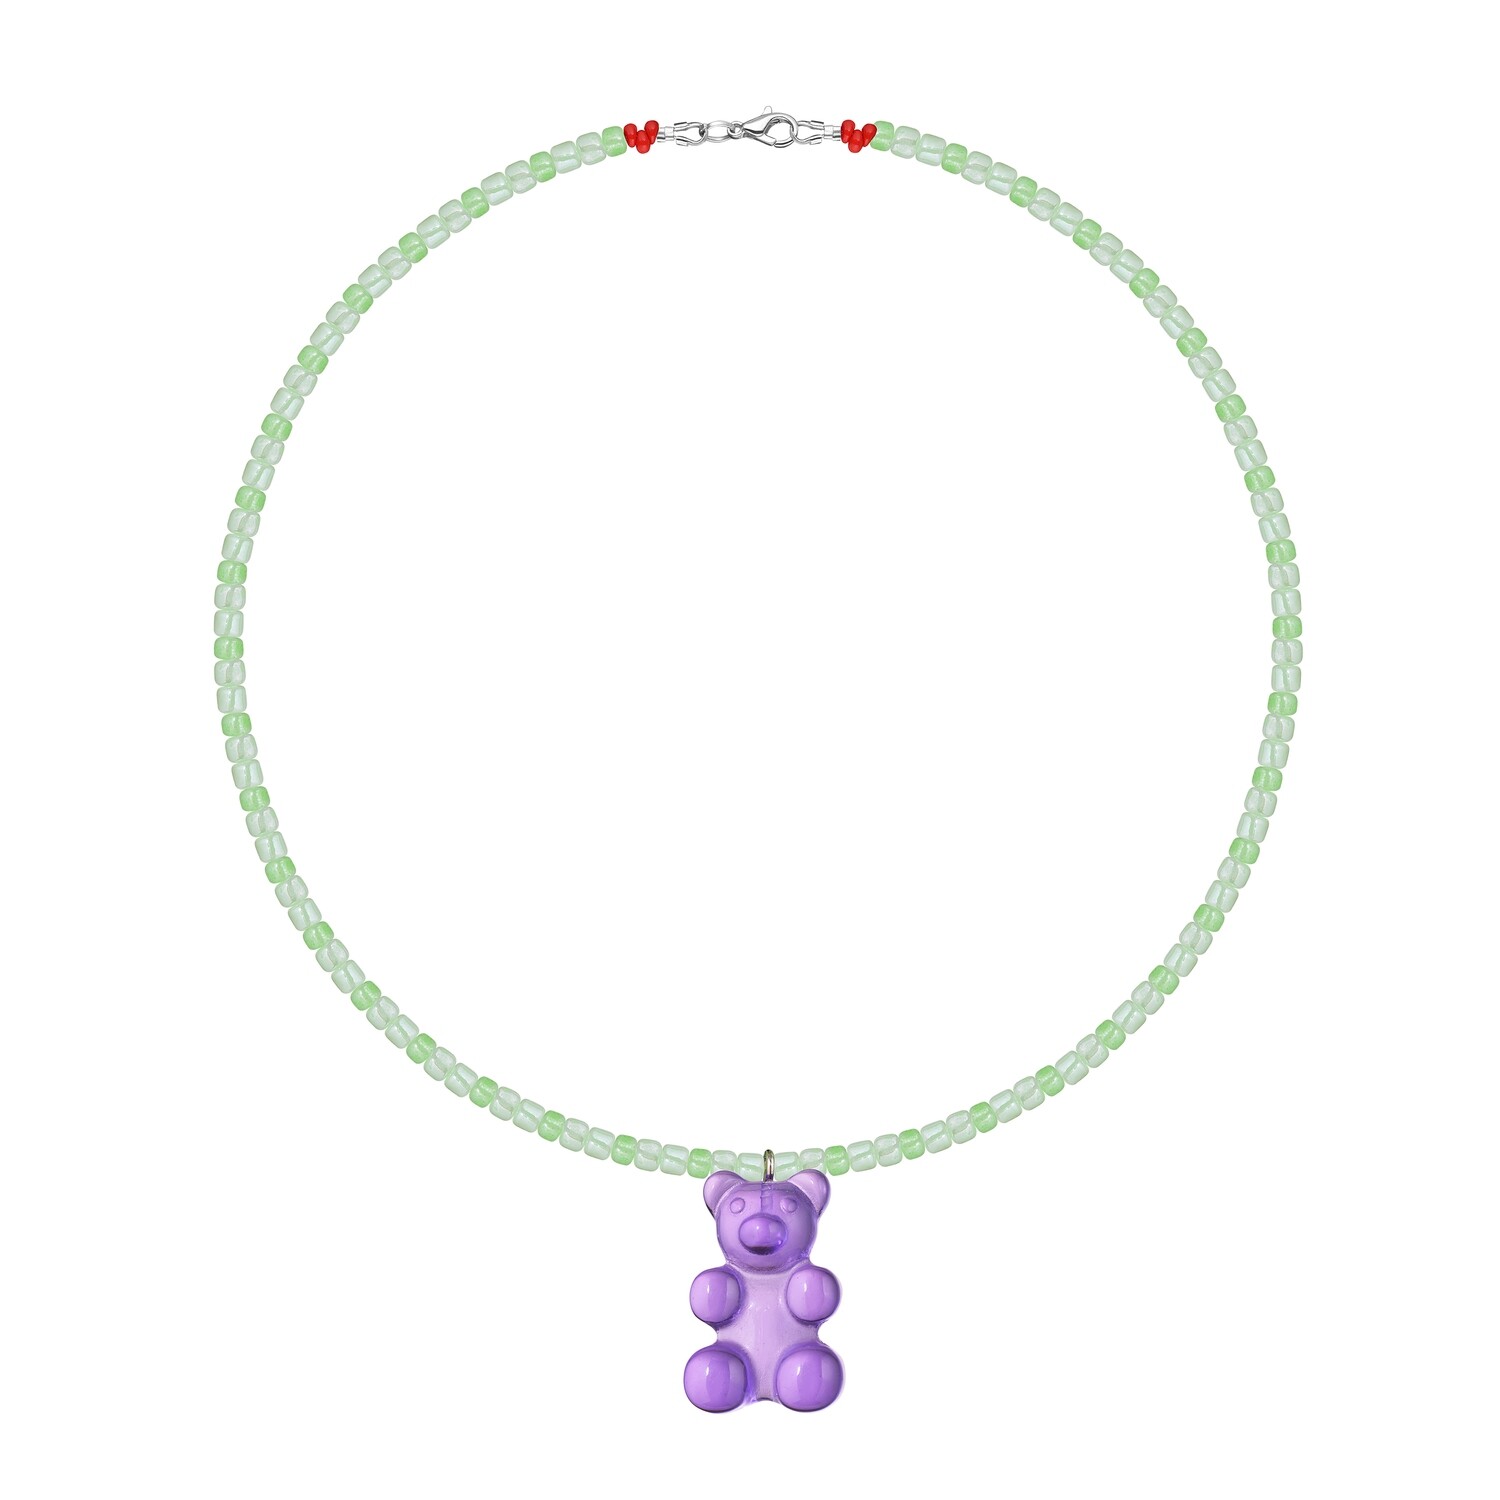 Apple and Grape Gummy Bear Necklace.